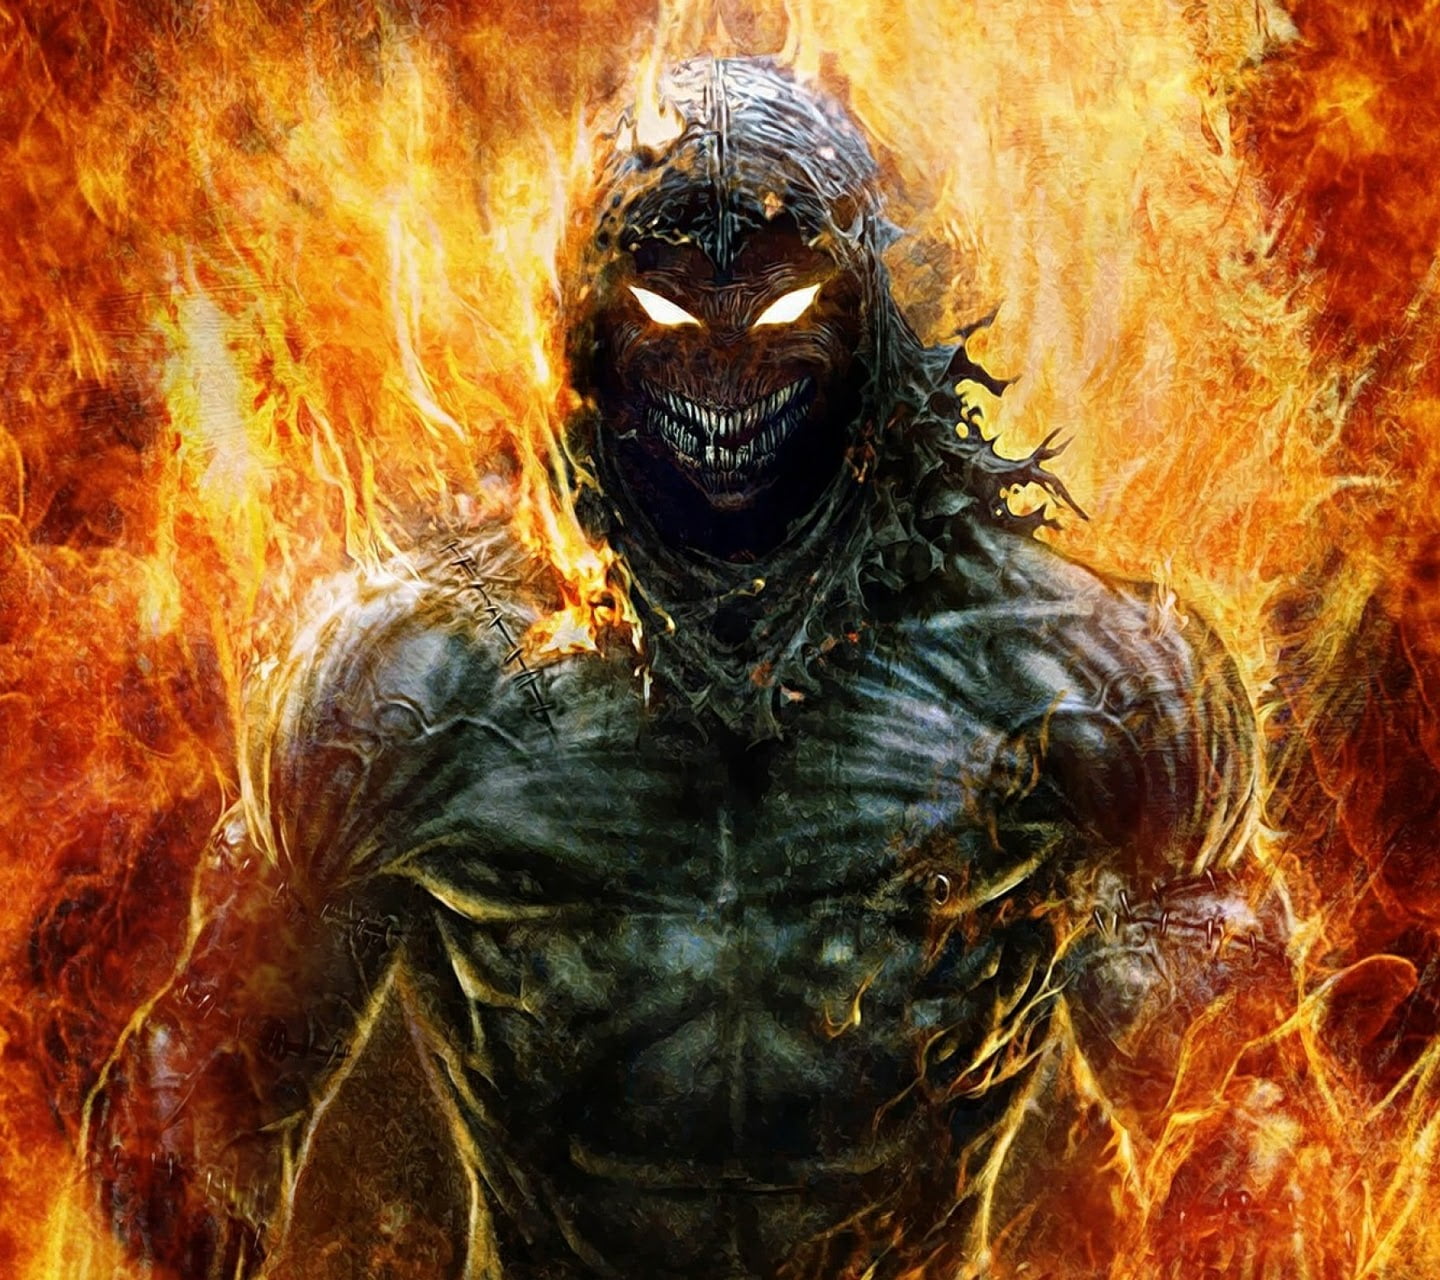 burning character illustration, fire, Disturbed